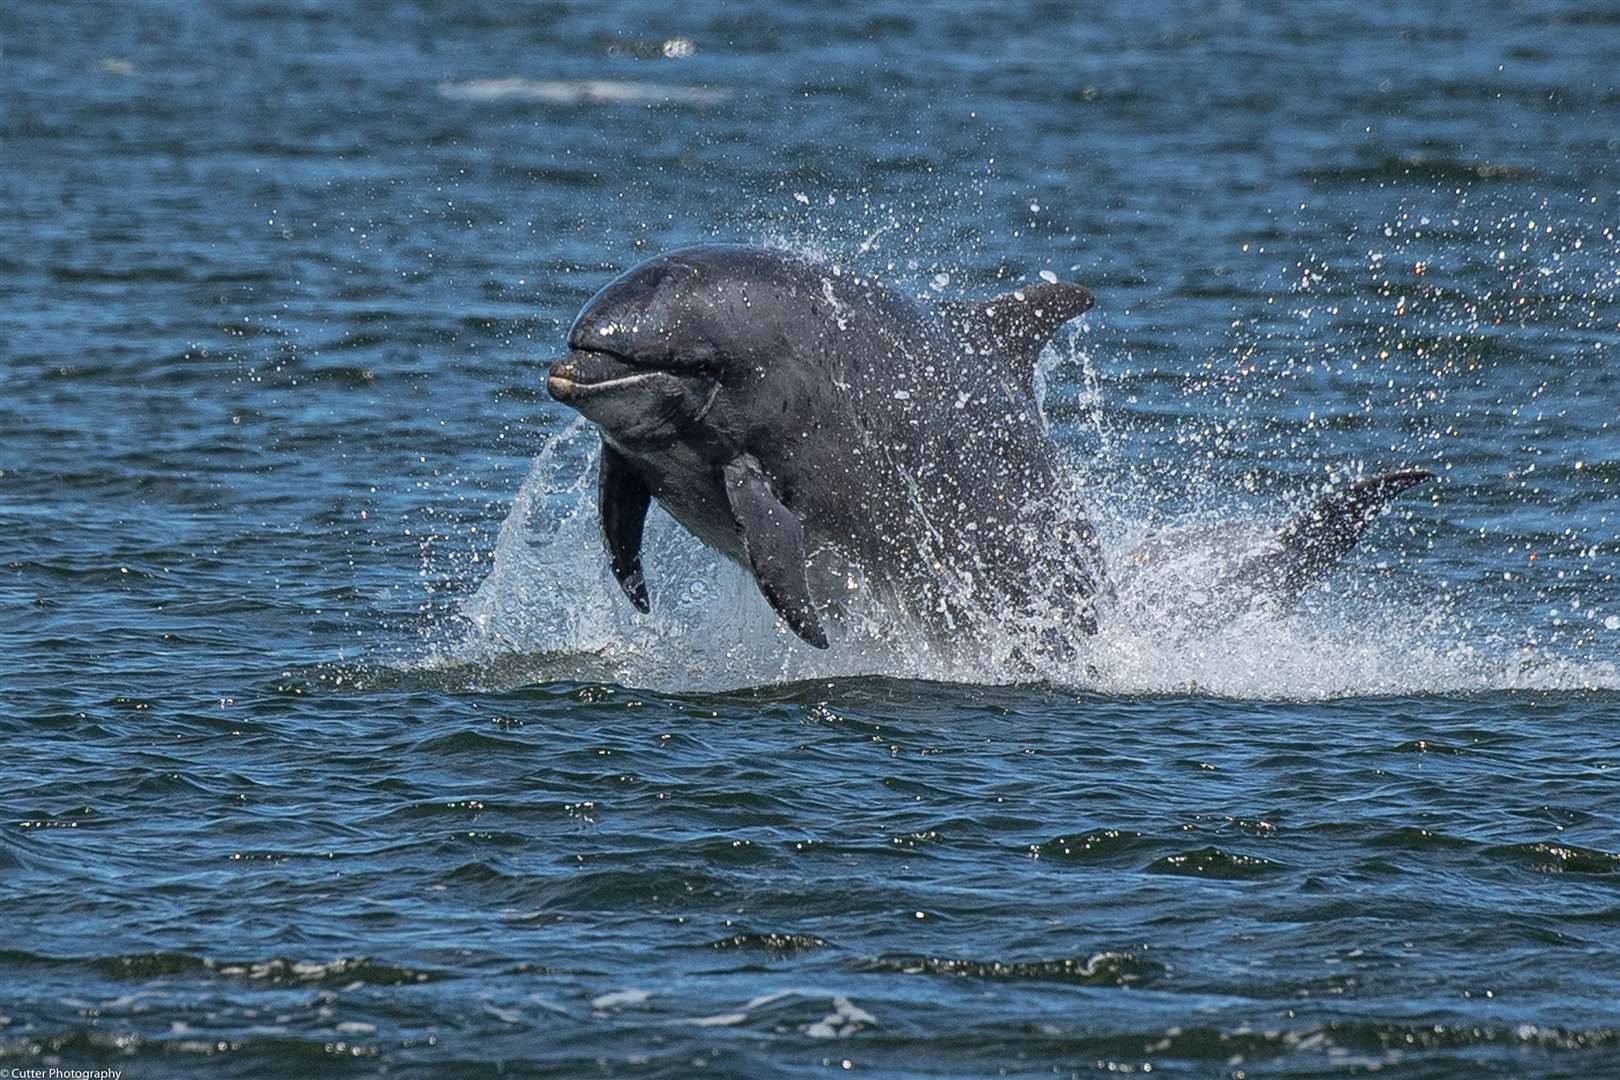 Scotland's first dolphin and porpoise conservation strategy has been launched